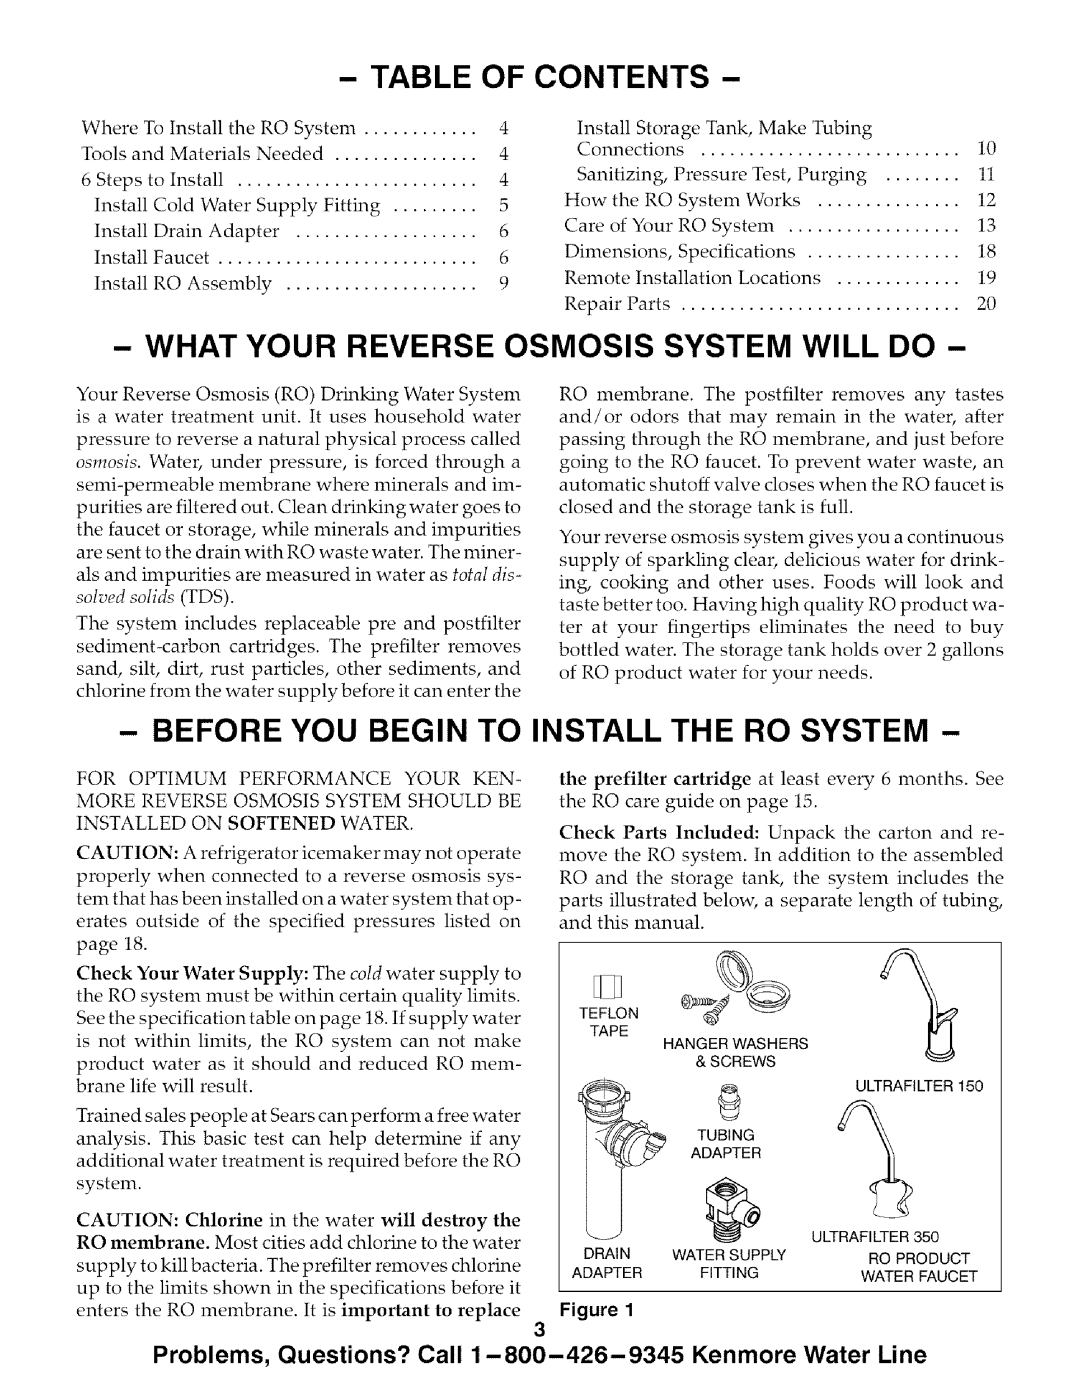 Kenmore 625.385720 Table Of Contents, What Your Reverse Osmosis System Will Do, Before You Begin To Install The Ro System 